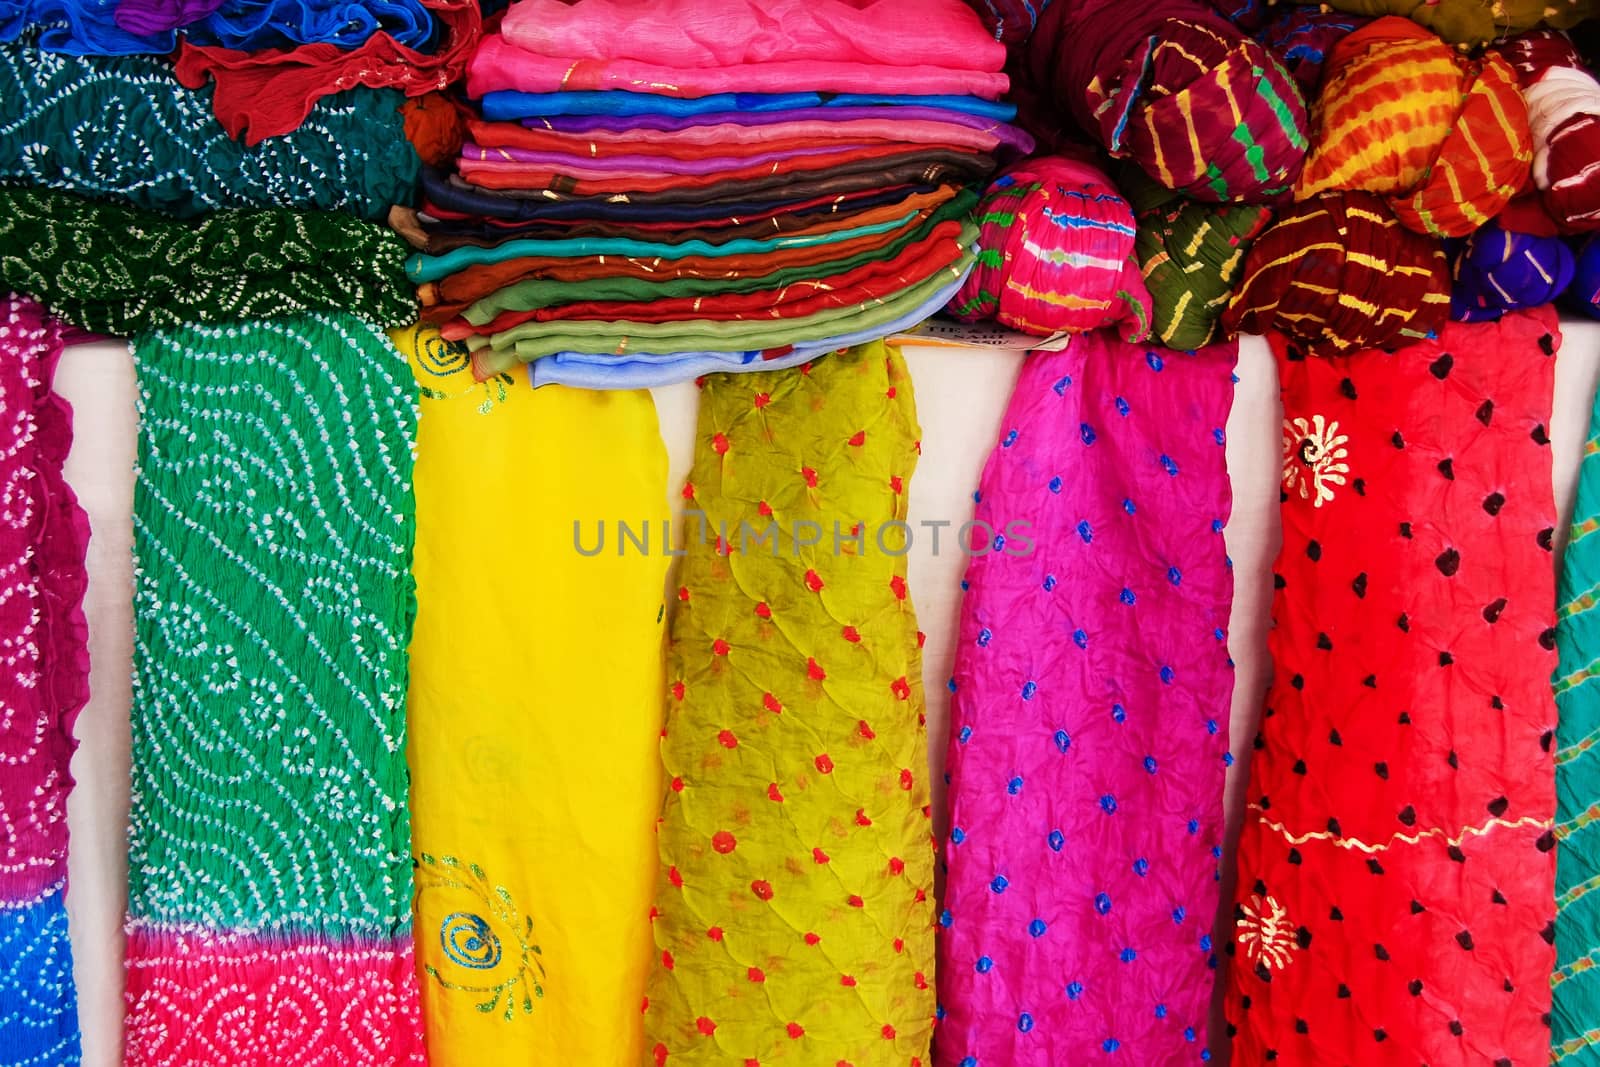 Display of colorful scarves, Mehrangarh Fort, Jodhpur, India by donya_nedomam